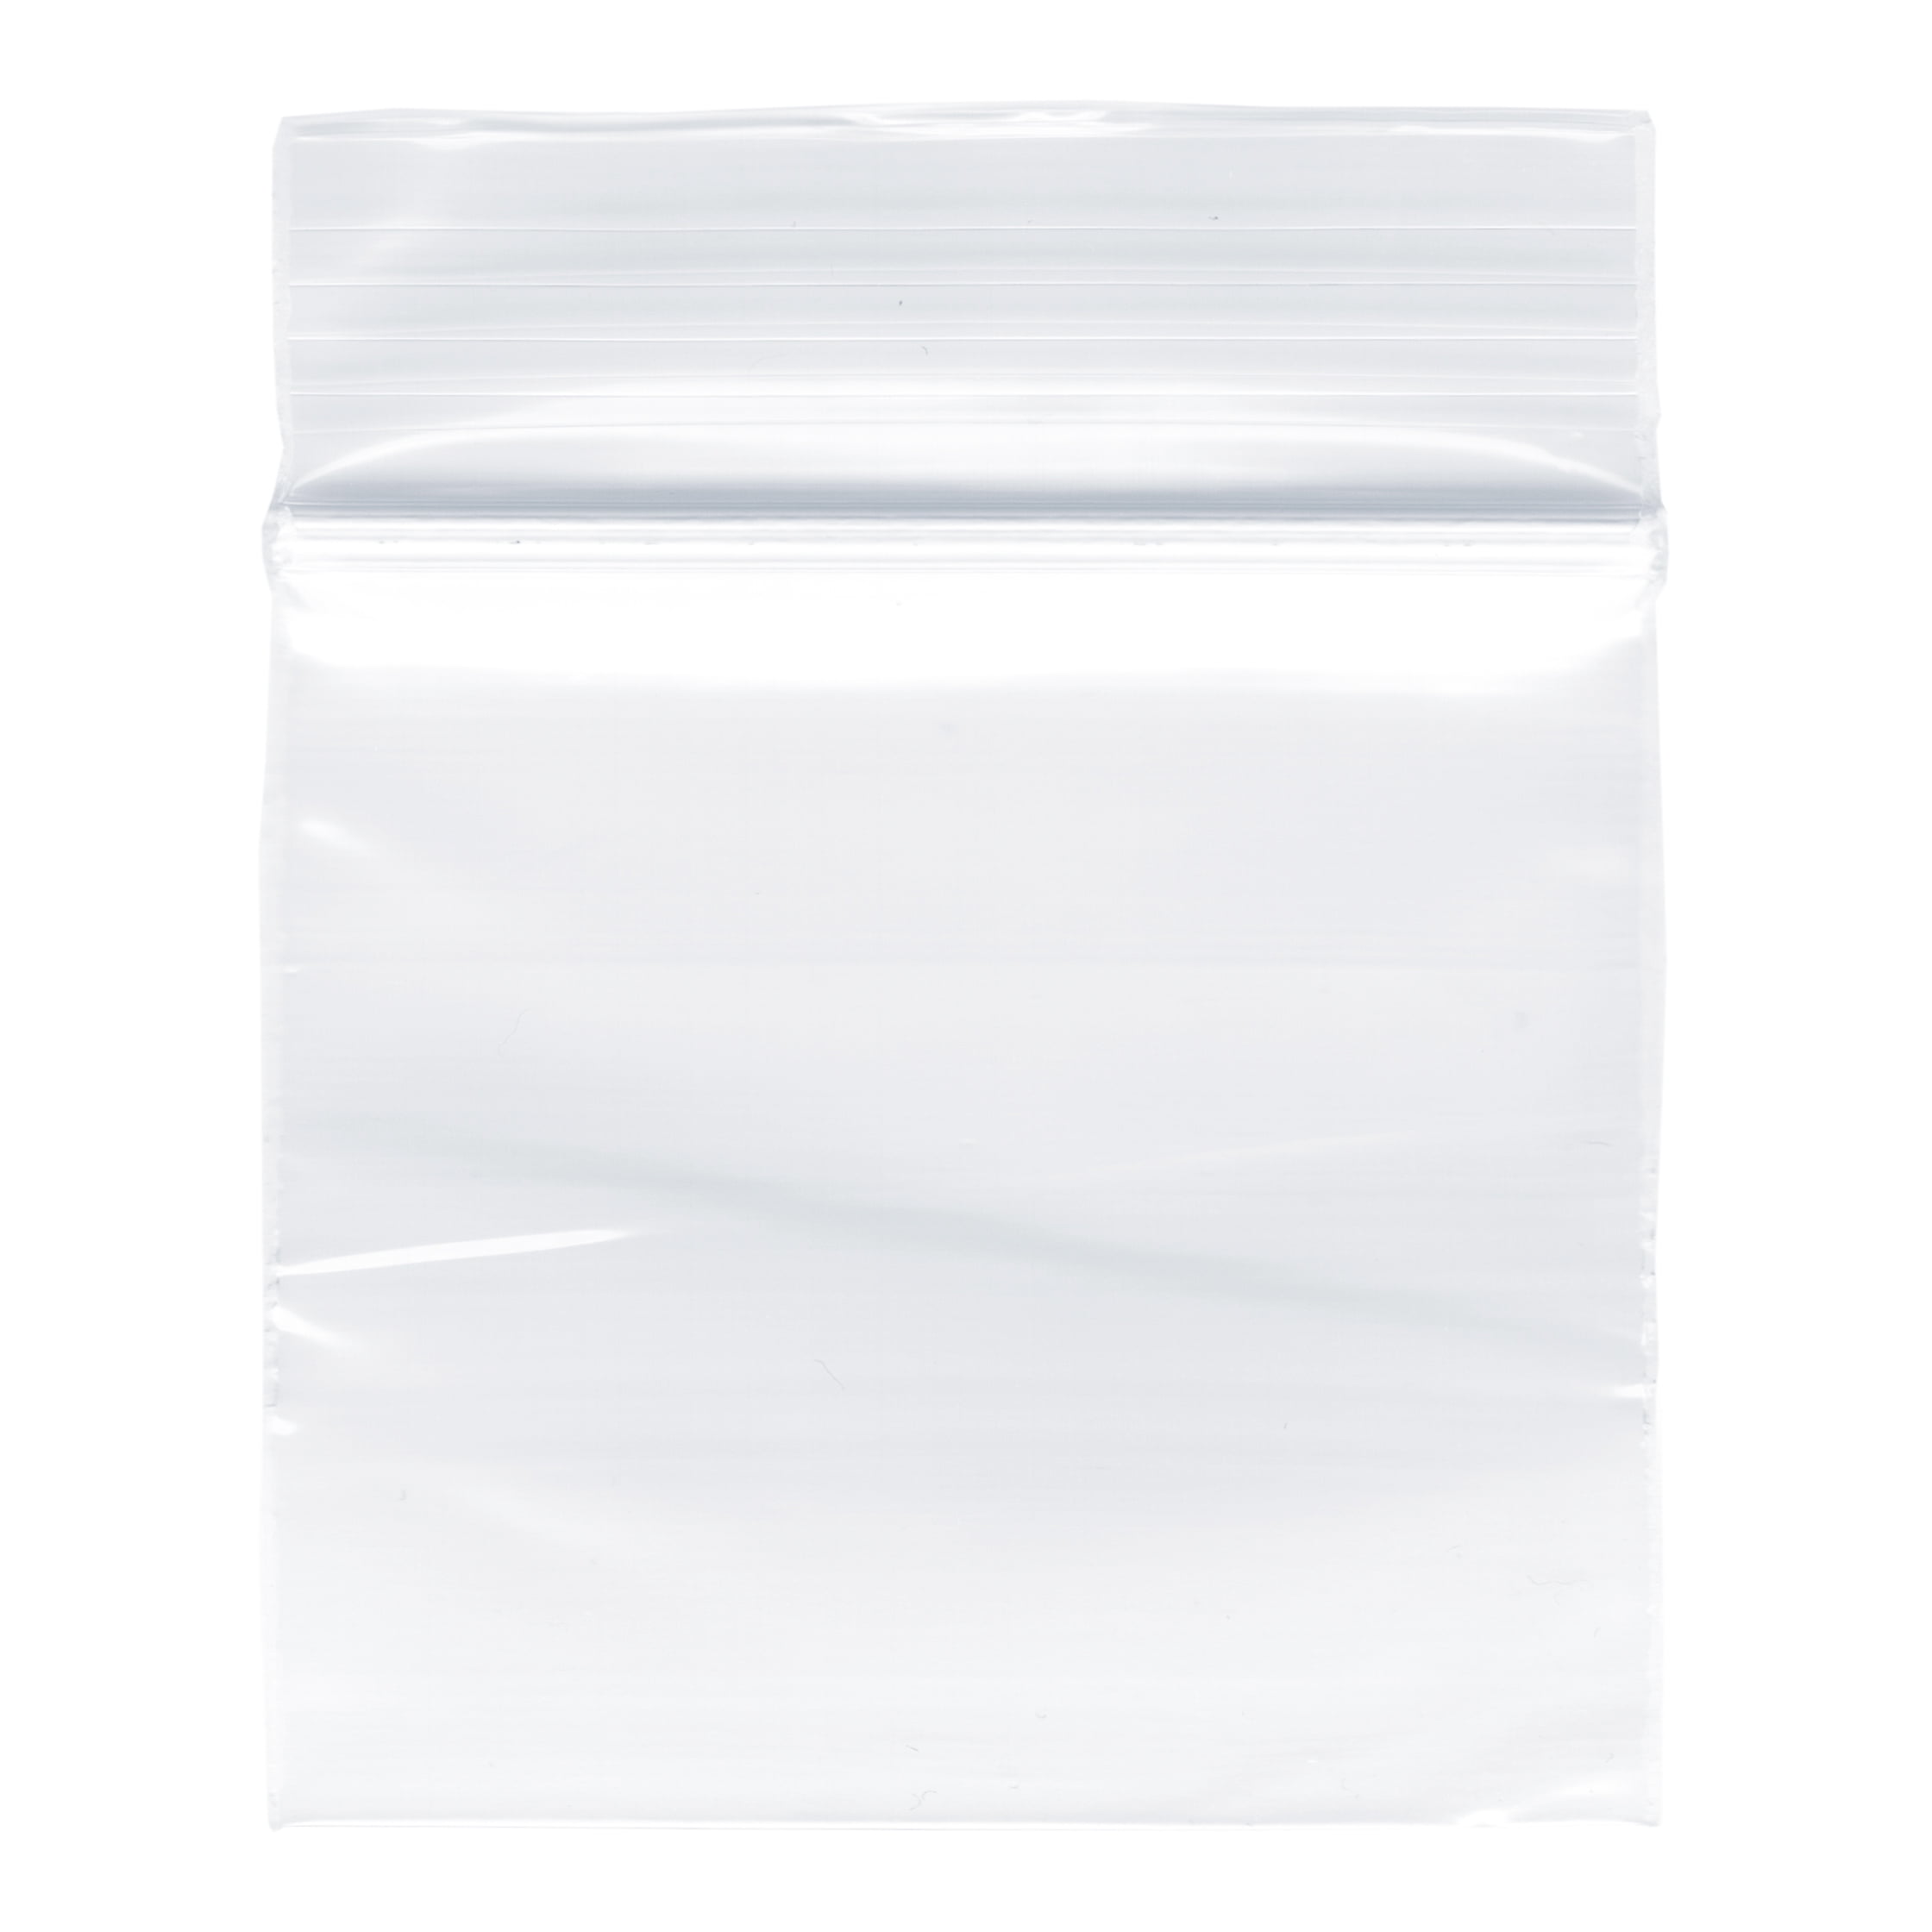 100 Snap Seal Plain Polythene Bags Various Sizes Small 38x64 to Large 254x356mm 